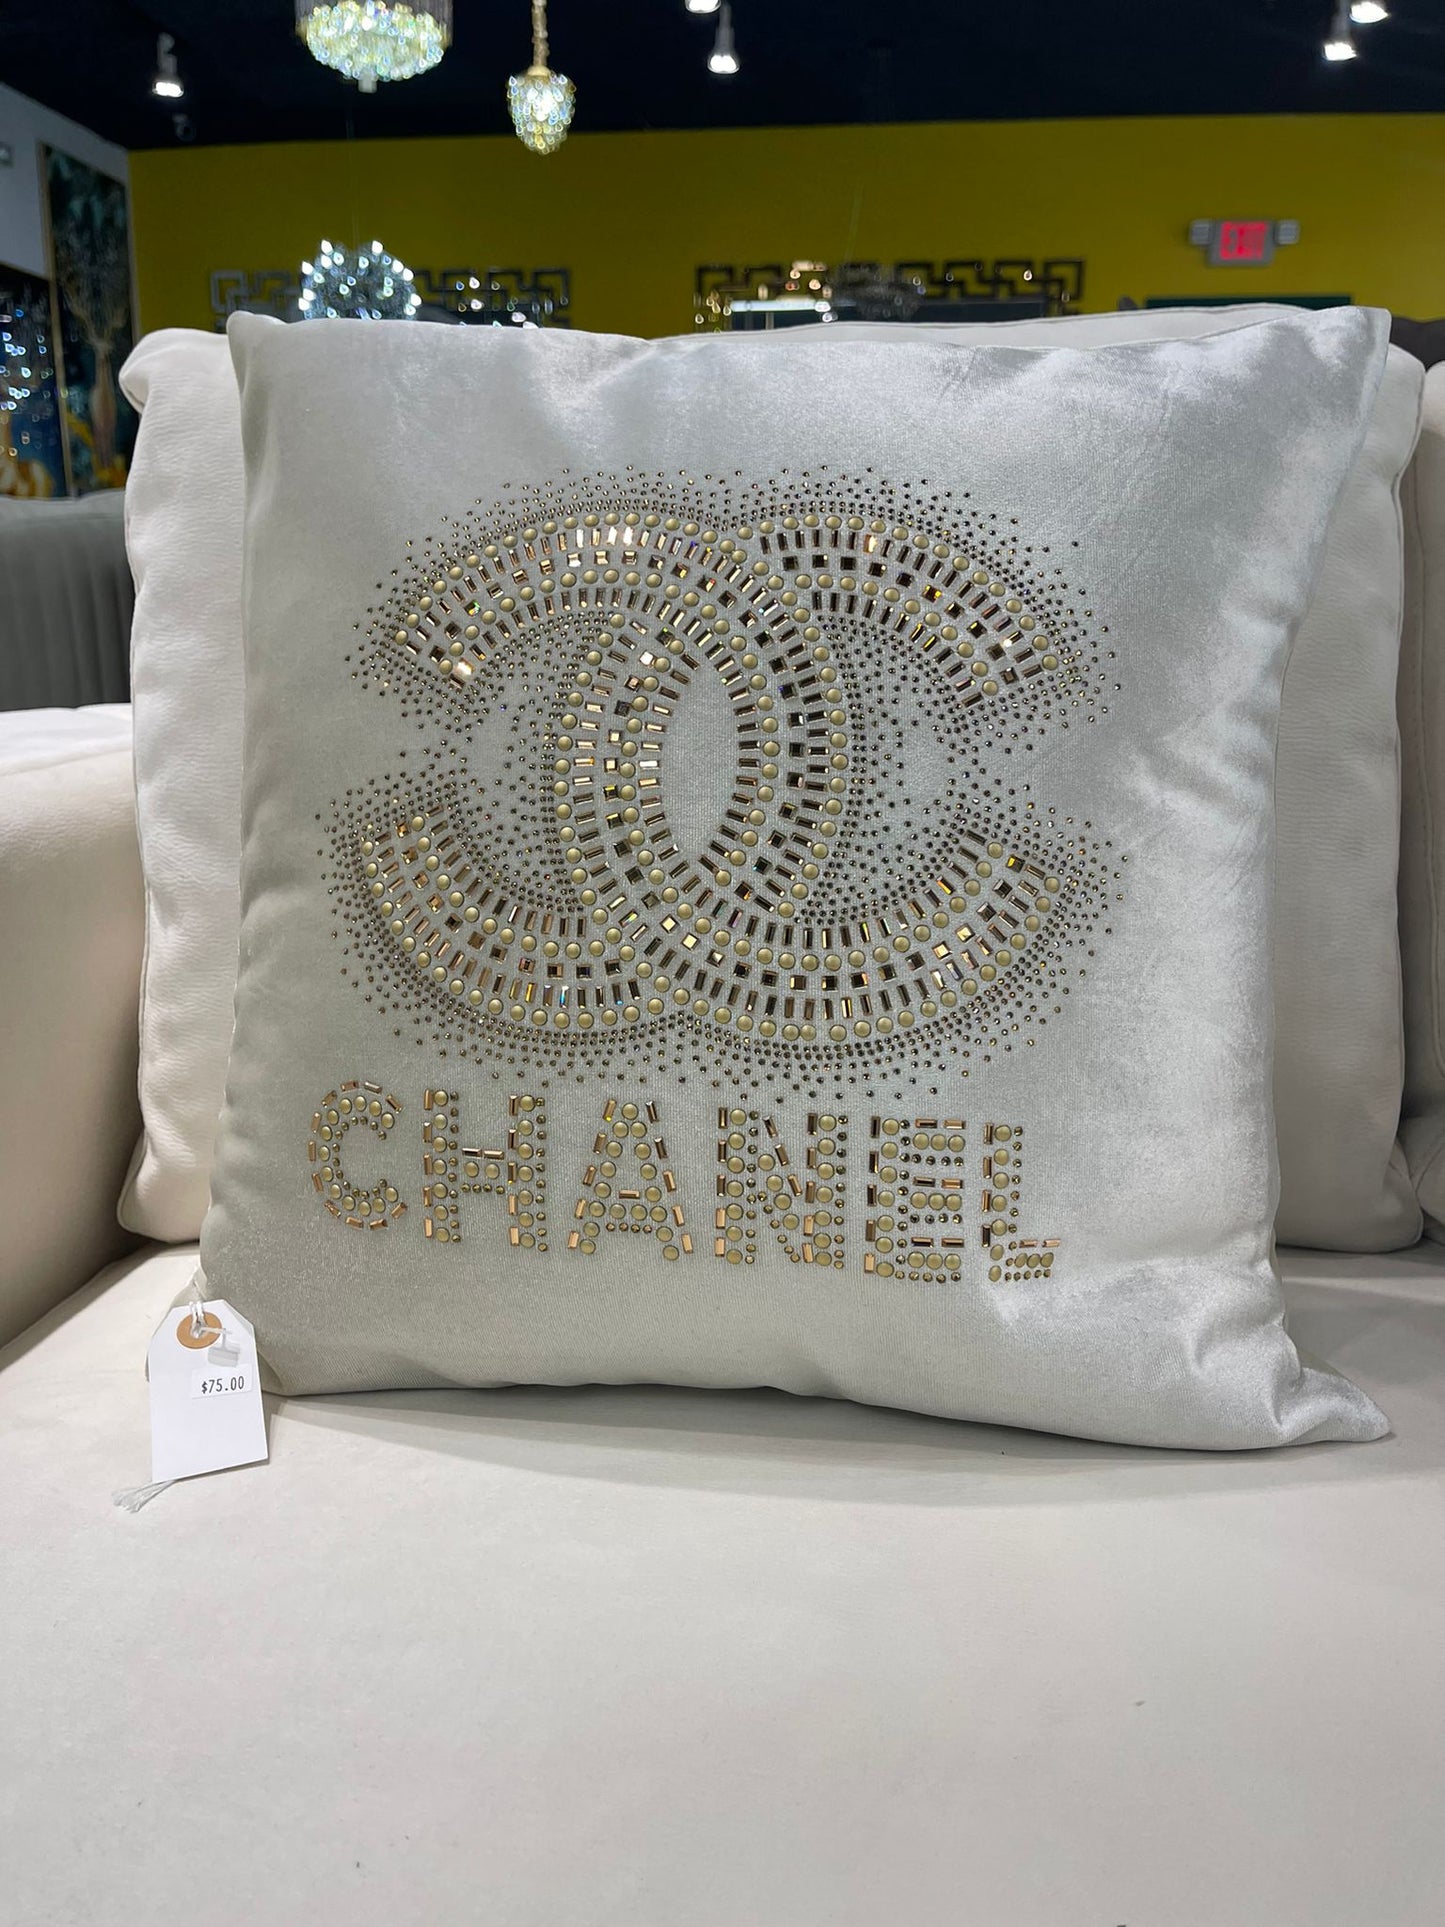 Coco Chanel Pillows & Cushions for Sale